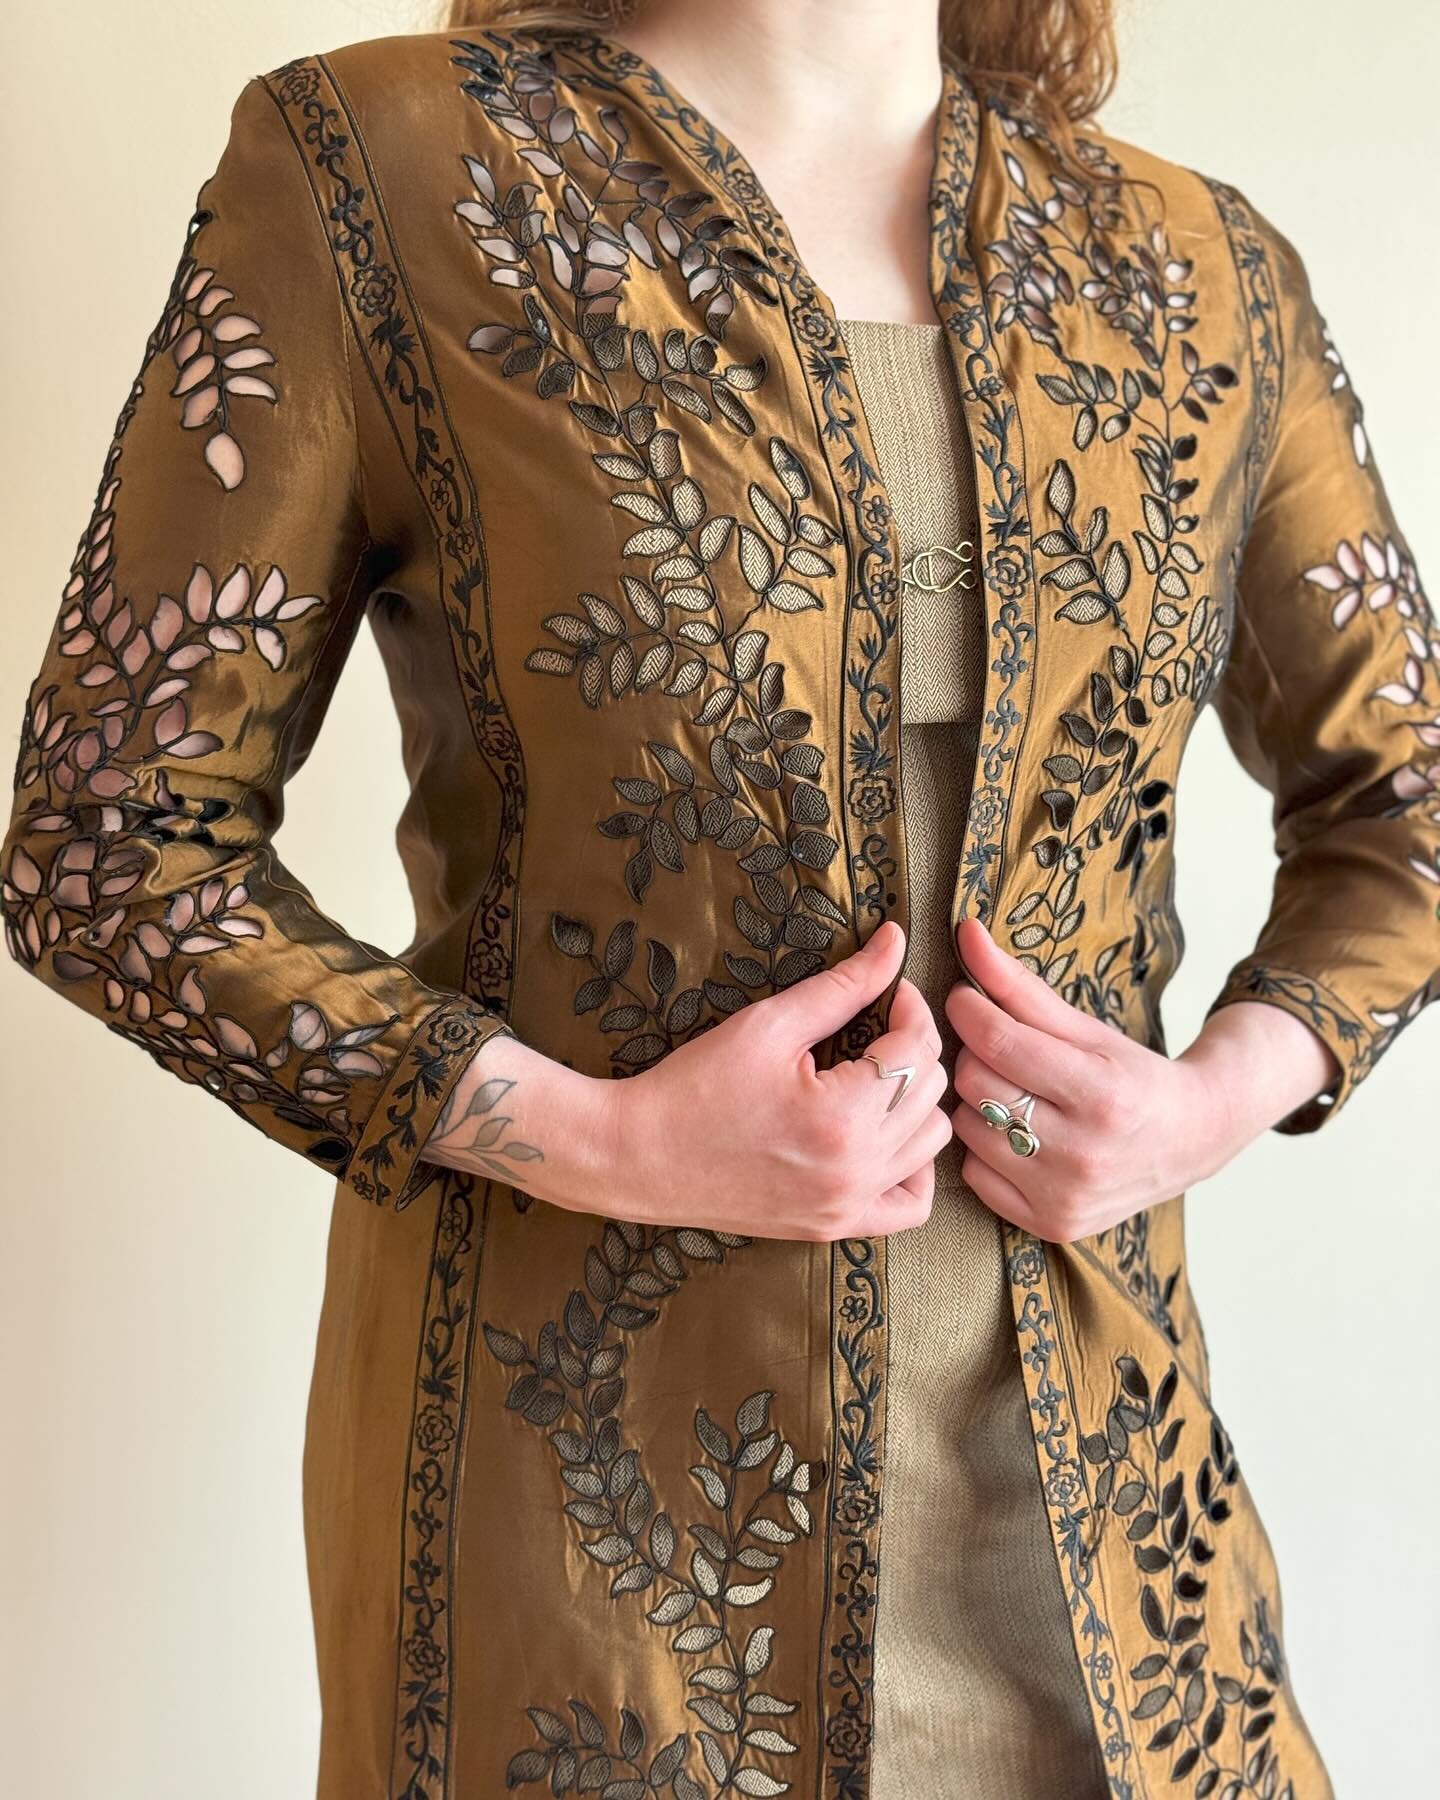 Bronze cut out jacket by Victor Costa / L / XL featured on Bailey / DM for details and to purchase / Shipping available 

Remember many pieces can be found on our Etsy page that aren&rsquo;t in the shop (but can be tried on by request!). Visit the li